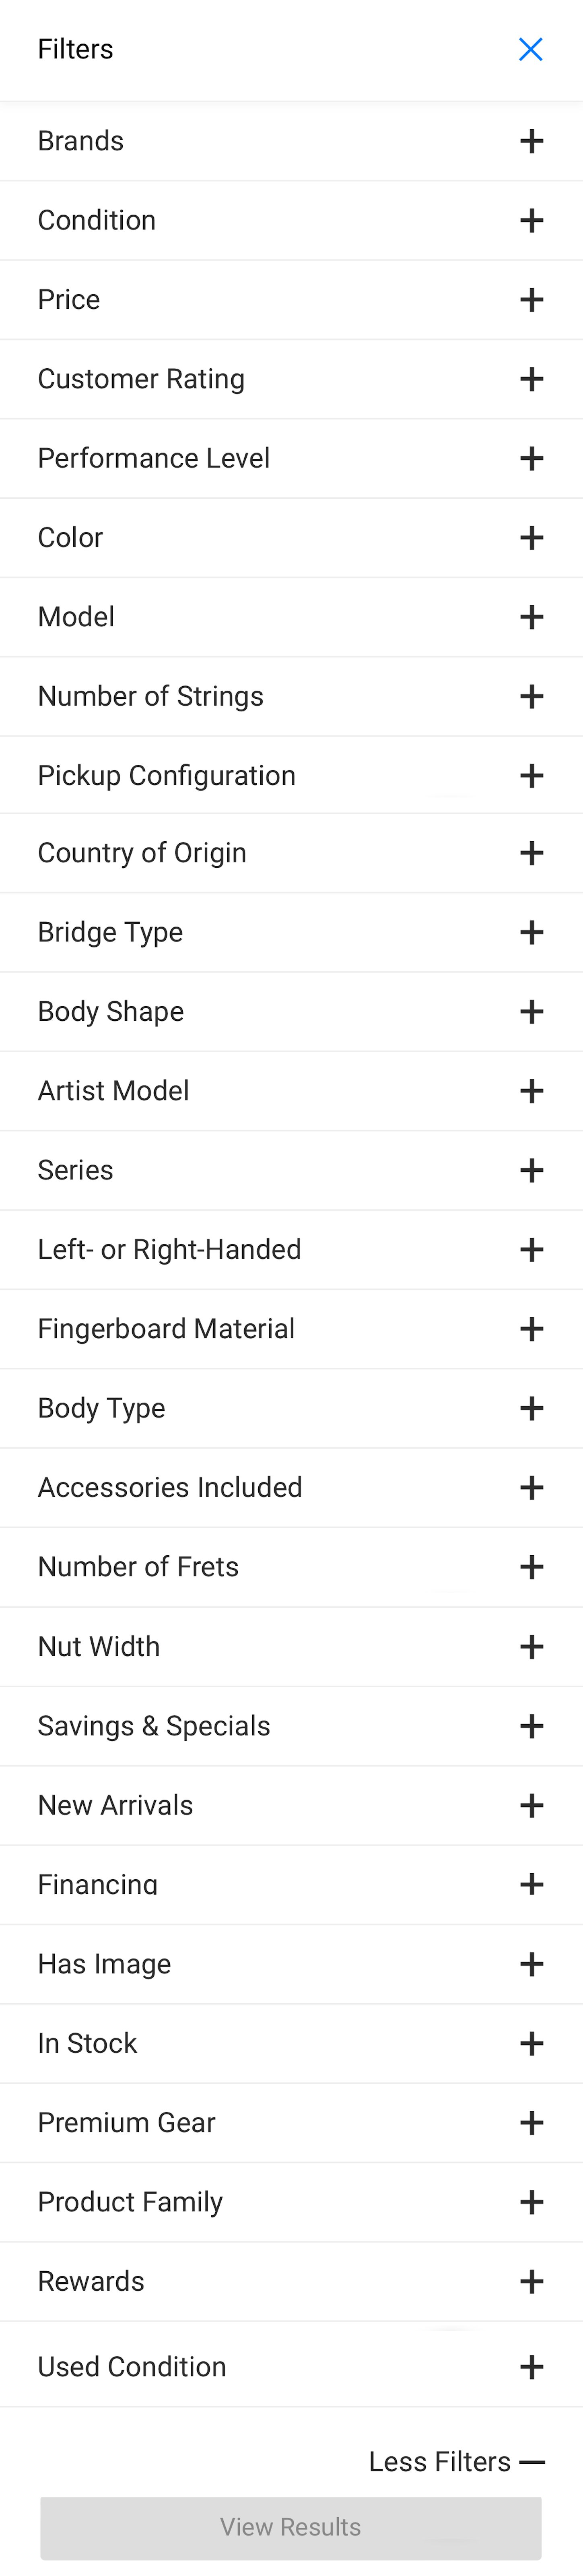 Nike's Mobile Filtering Options – 432 of 487 Filtering Options